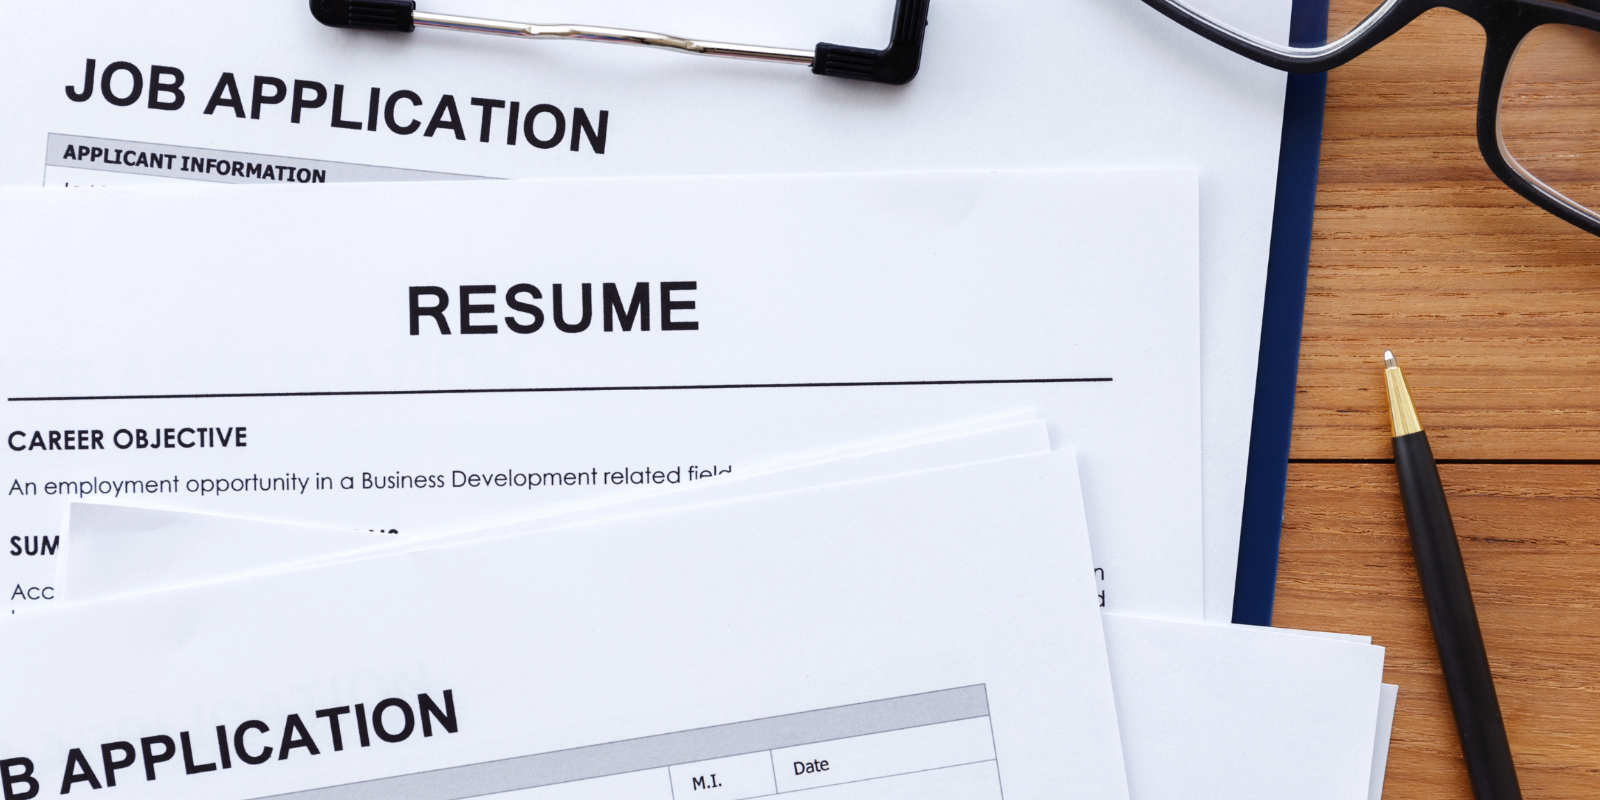 Job application and resume documents with a pen and glasses on a wooden table.